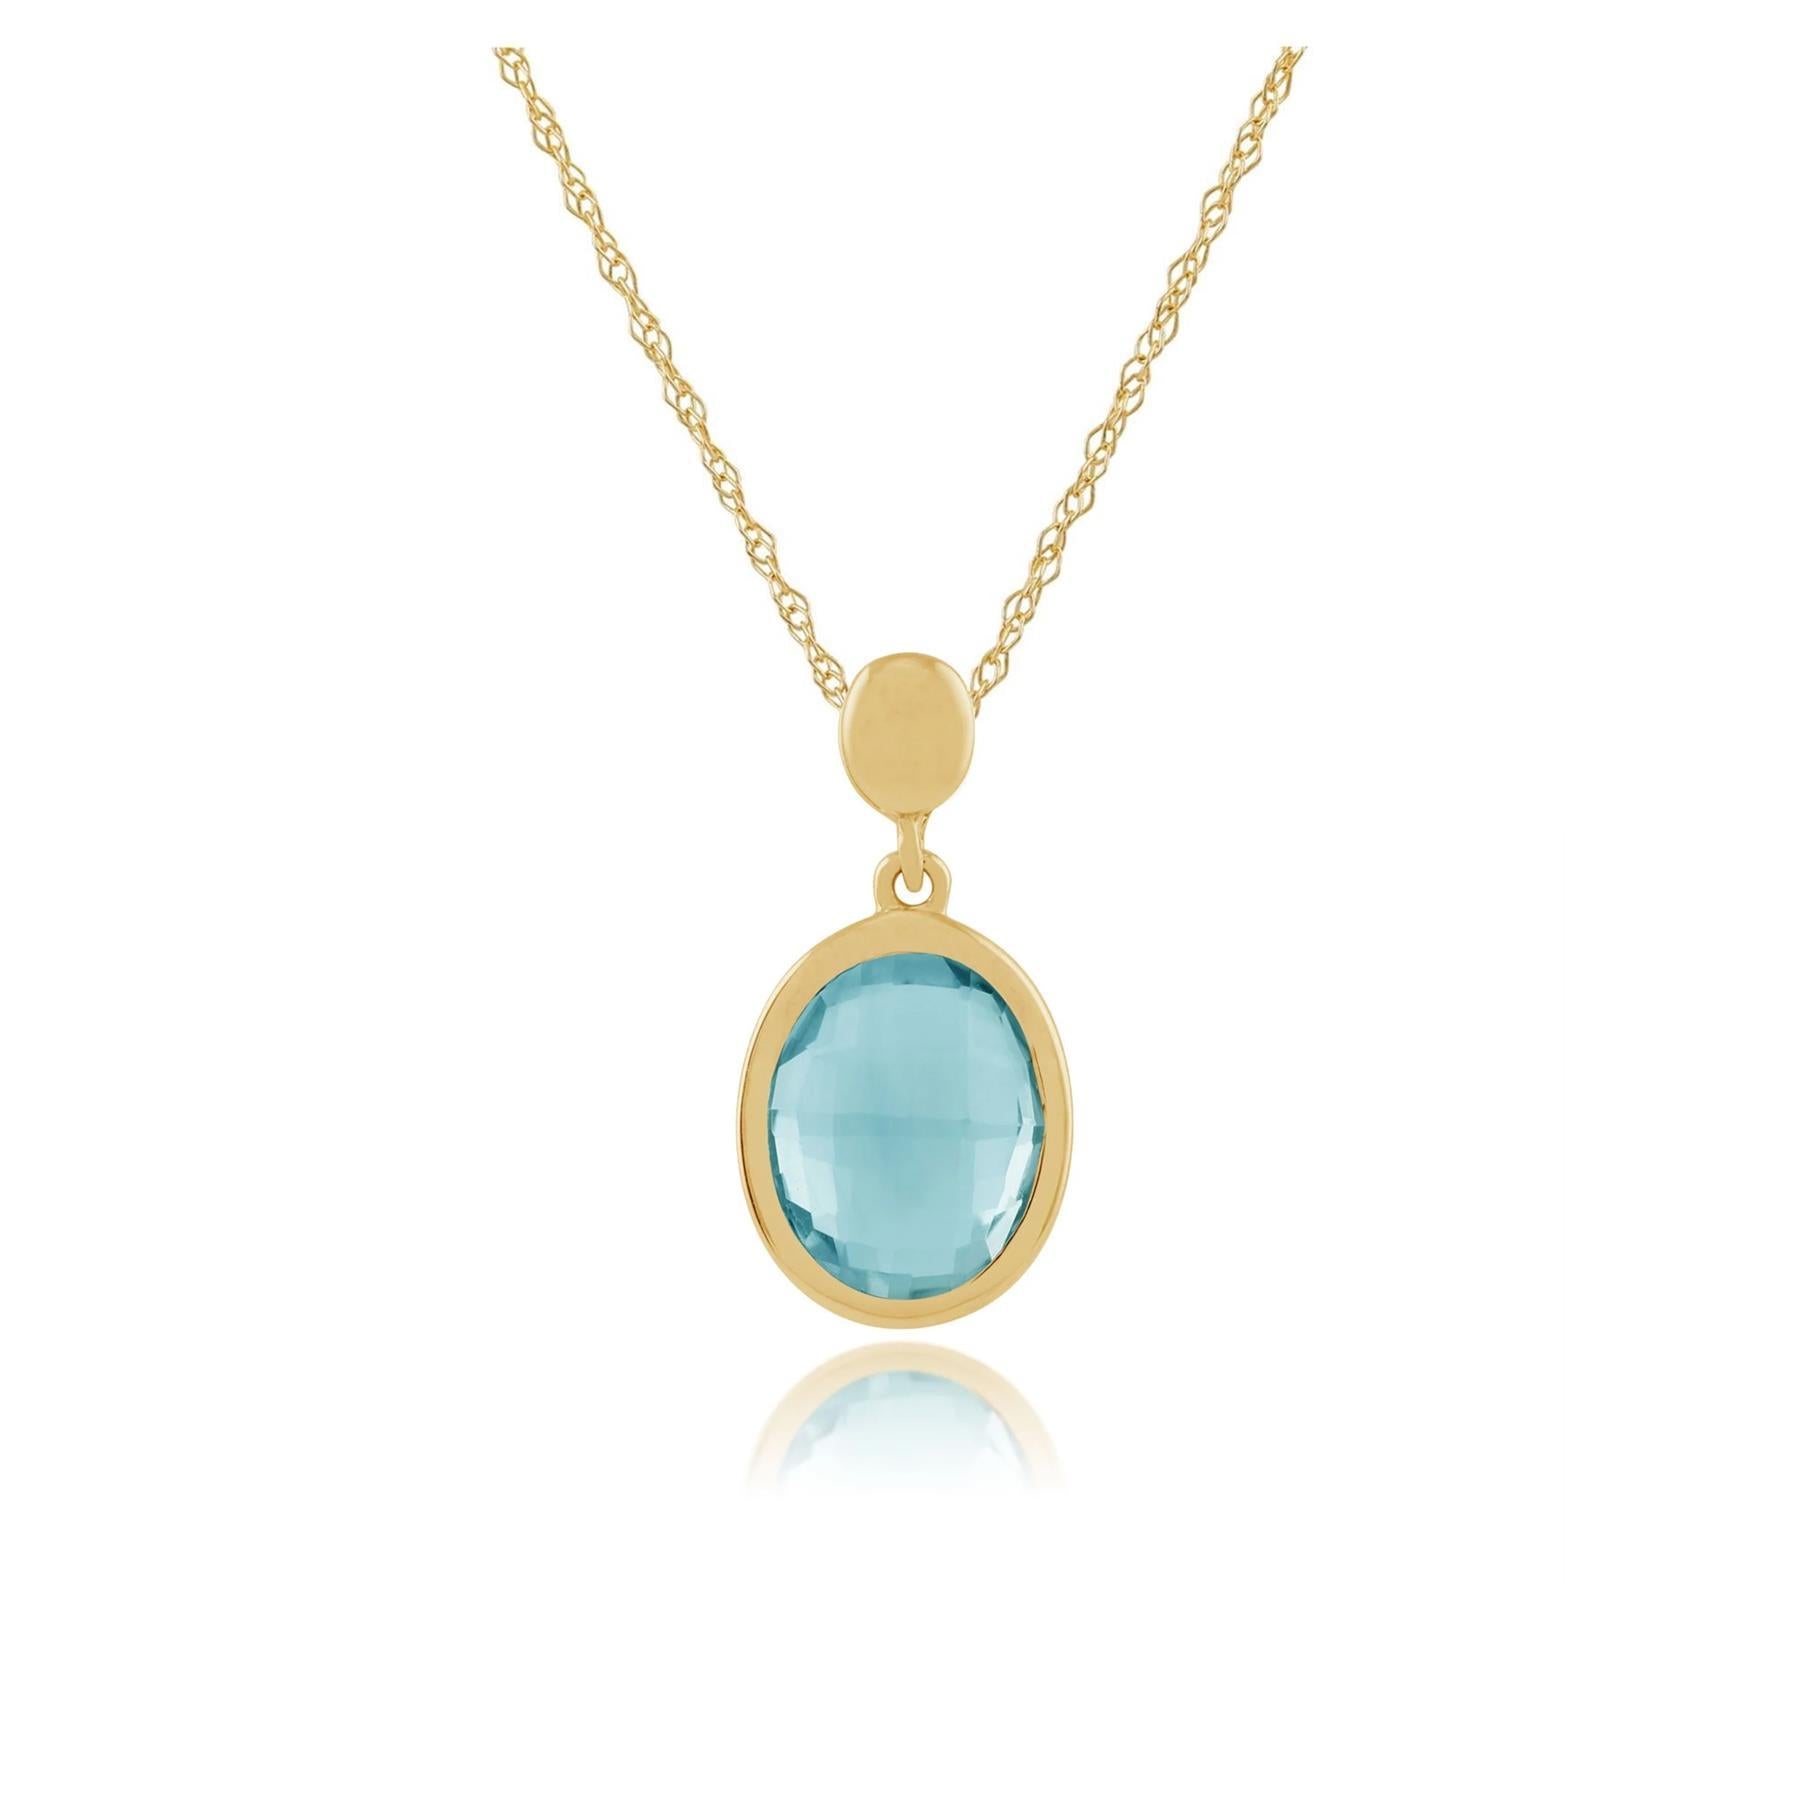 Oval Blue Checkerboard Topaz 9ct Yellow Gold Pendant on Chain